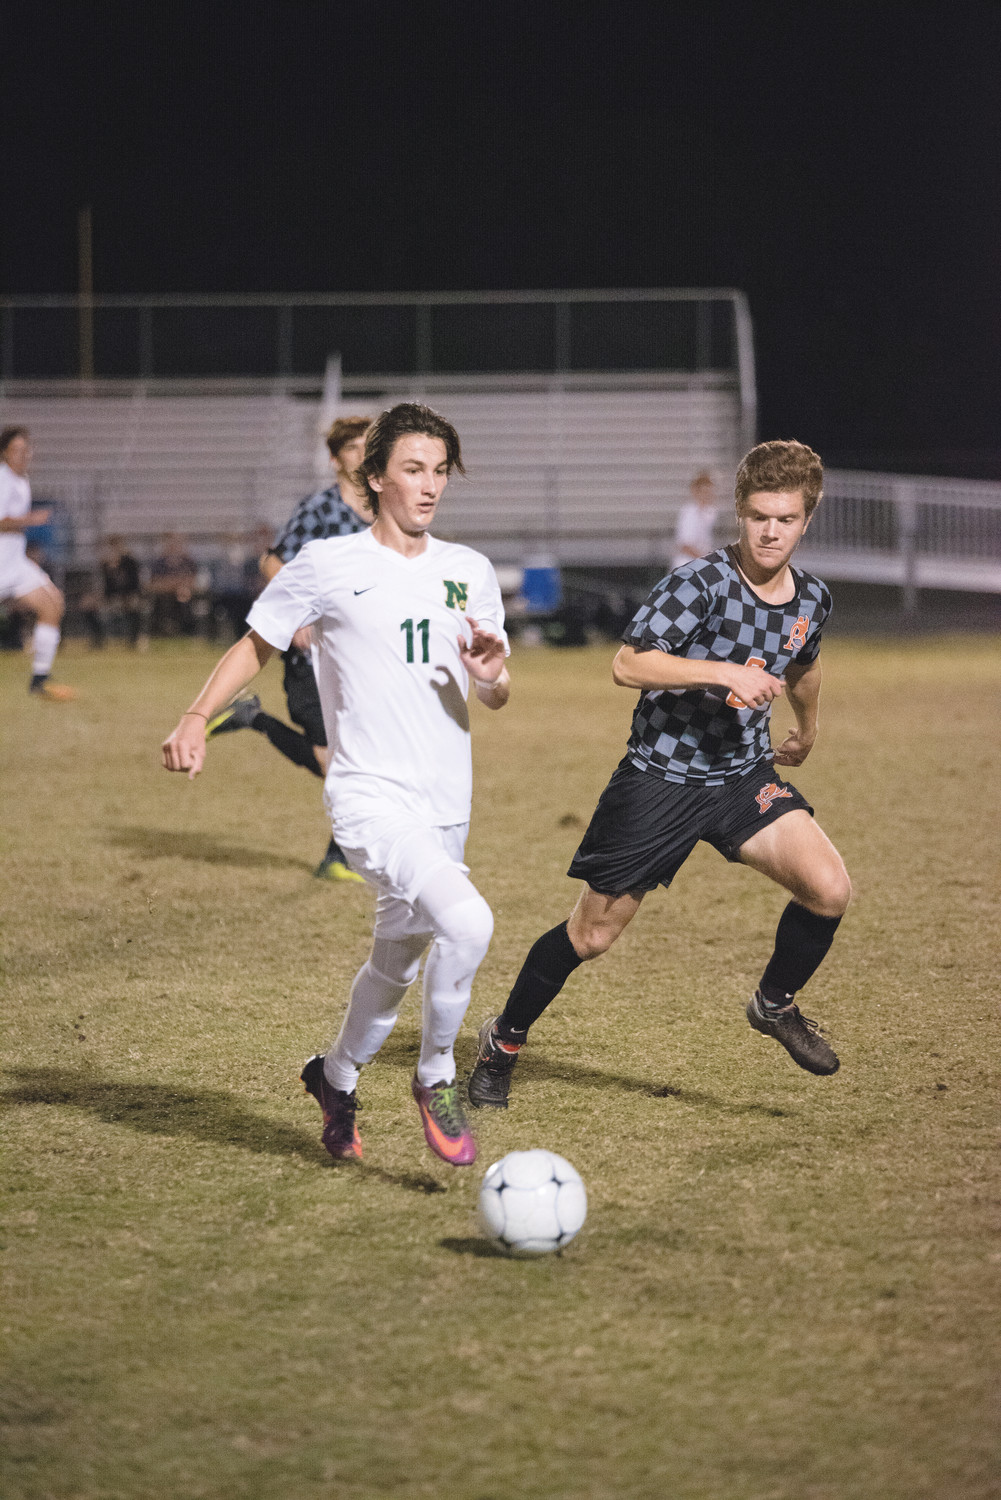 Nease’s Robby Sobol (11) moves the ball against Atlantic Coast during the Panthers’ win on Nov. 29. Sobol scored one of Nease’s two goals in the game.